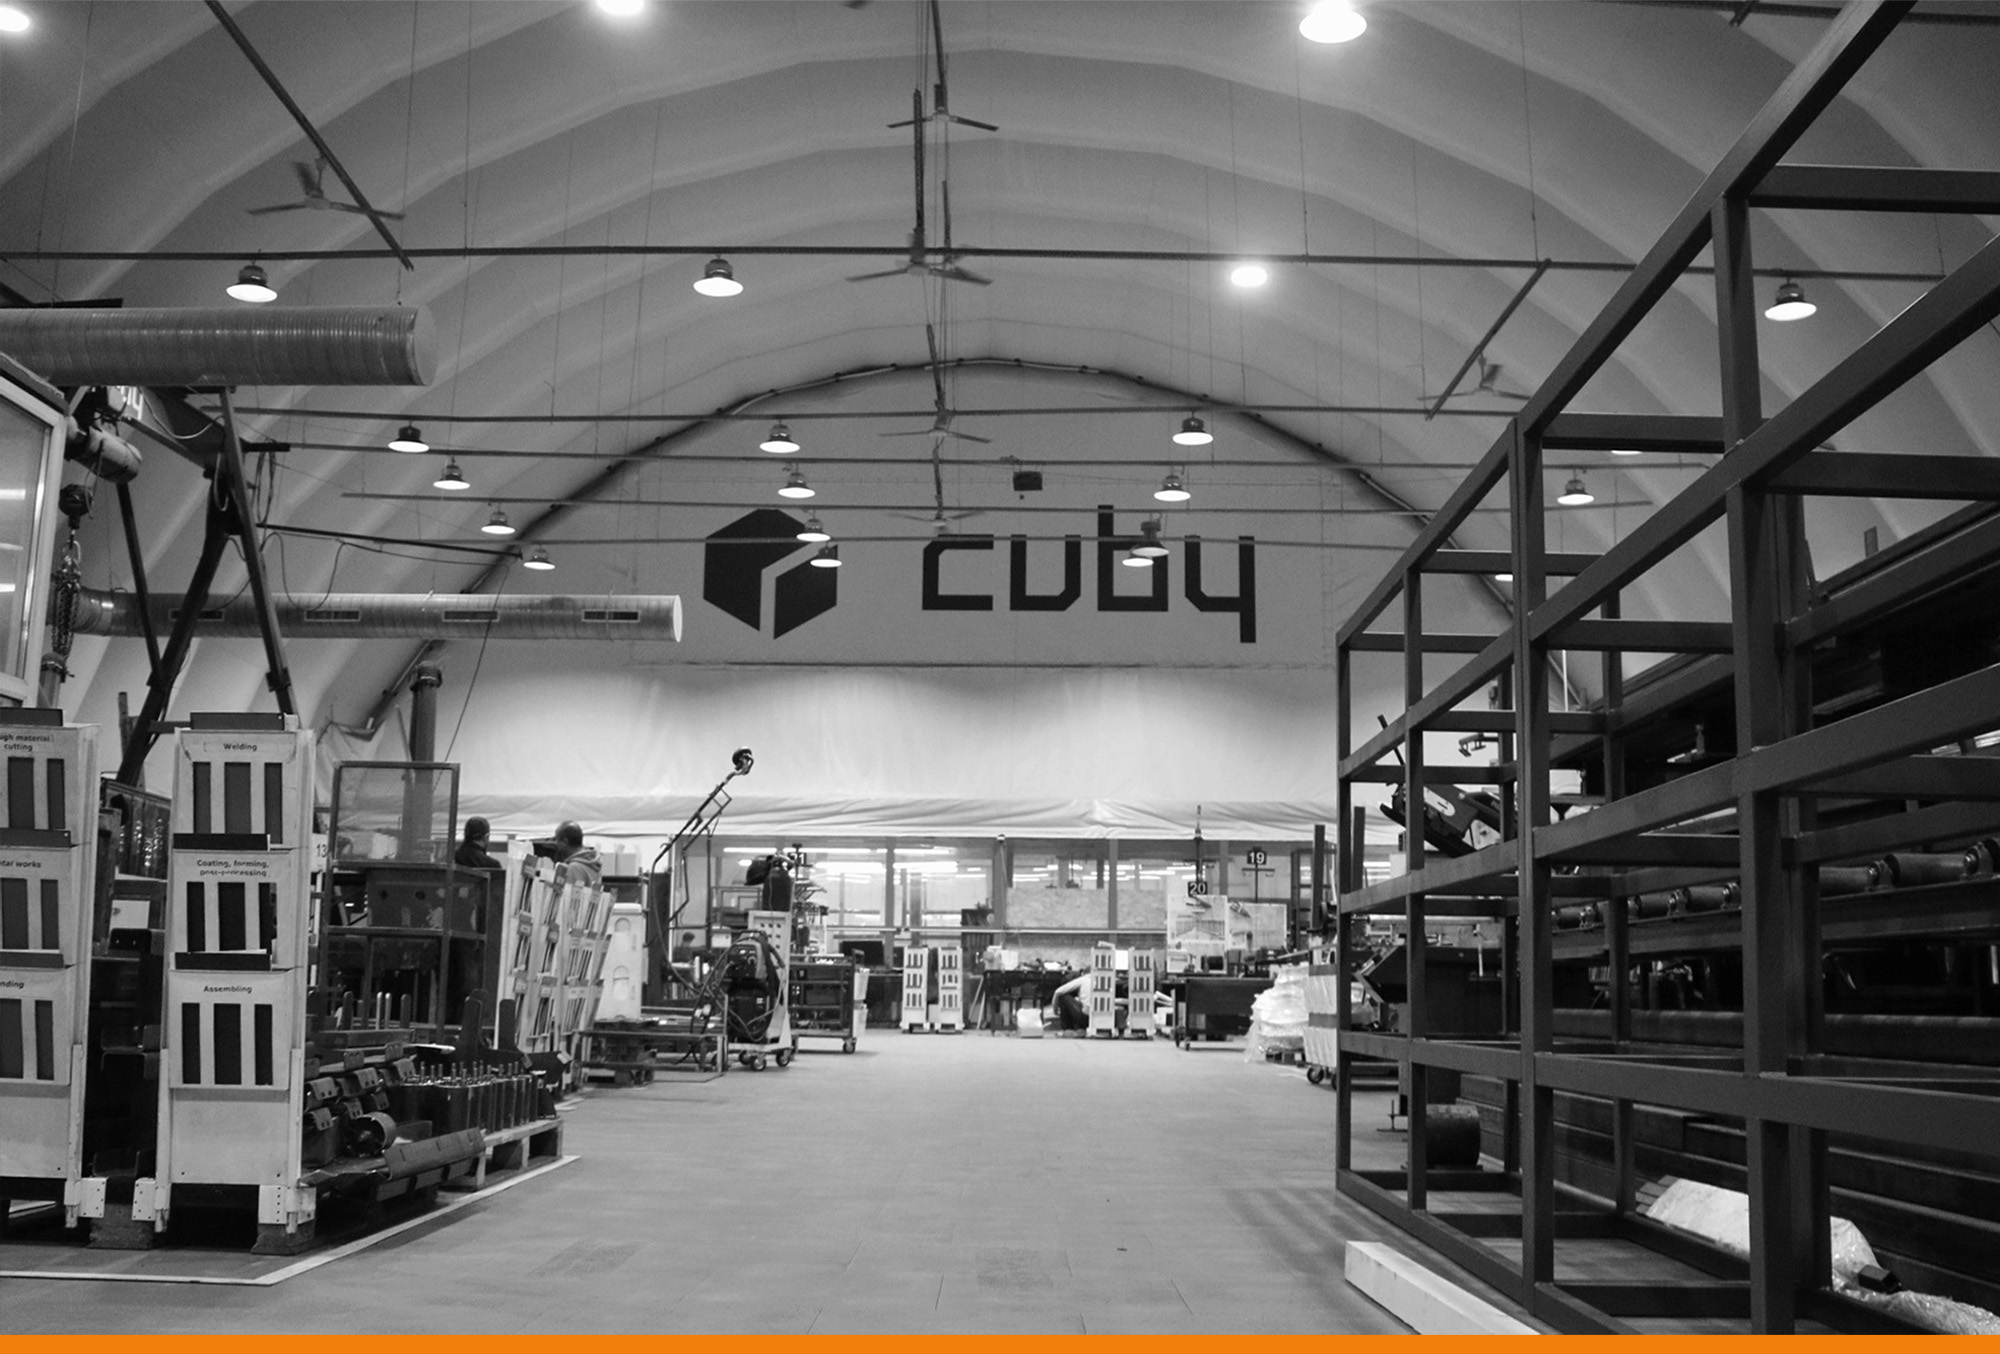 Cuby mobile micro factory interior